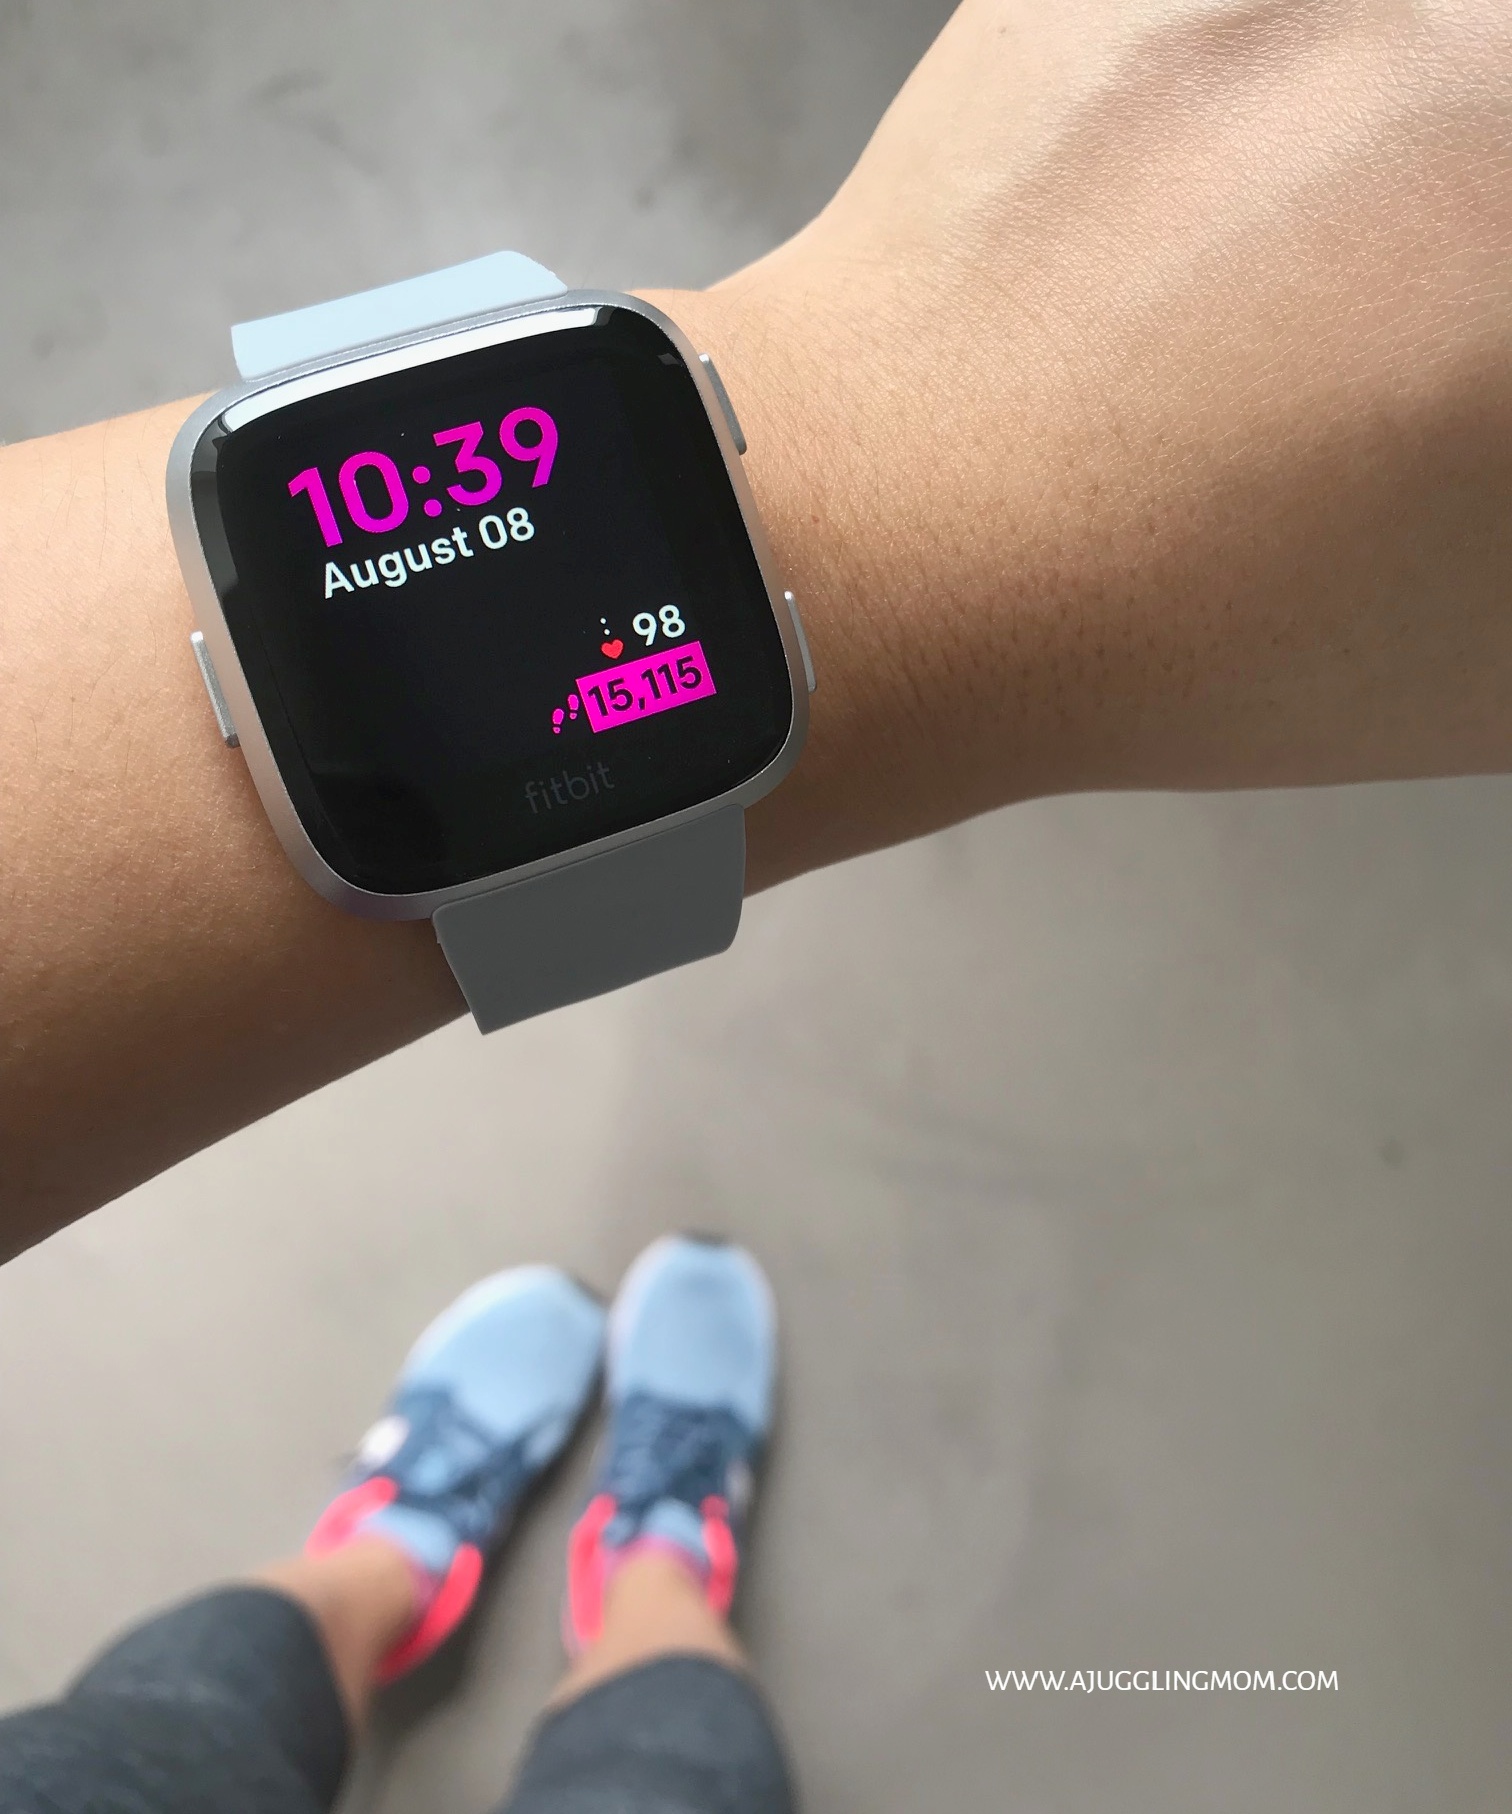 vitality fitbit discount